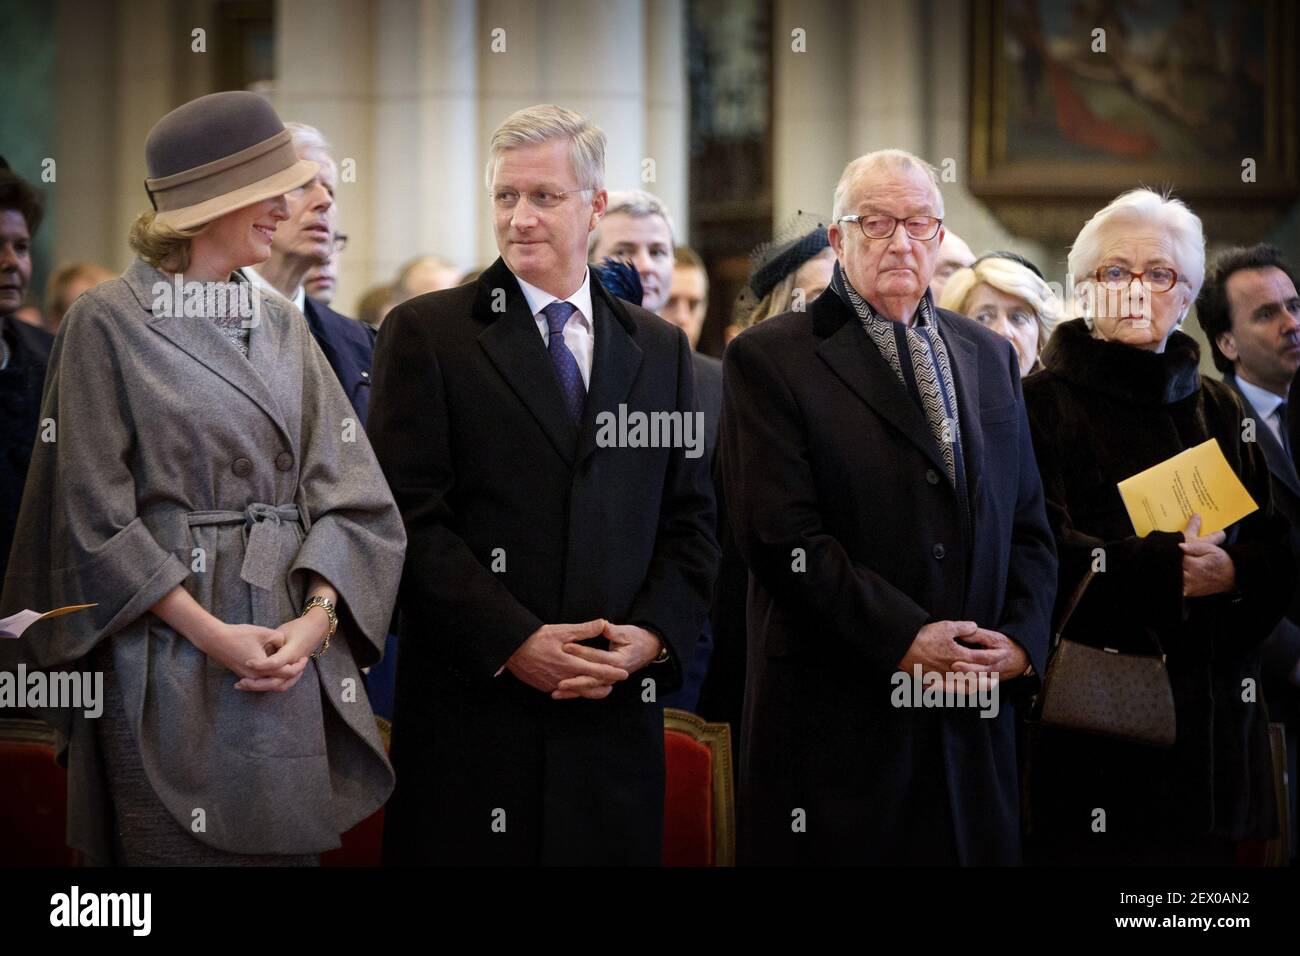 King Filip and Queen Mathilde and the Members of the Royal Family King Albert II, Queen Paola attend the annual celebration of the Eucharist in memory of the deceased members the Royal Family. The Mass will take place at the Our Lady Church in Laken. Feb. 12, 2015 *** Please Use Credit from Credit Field *** Stock Photo